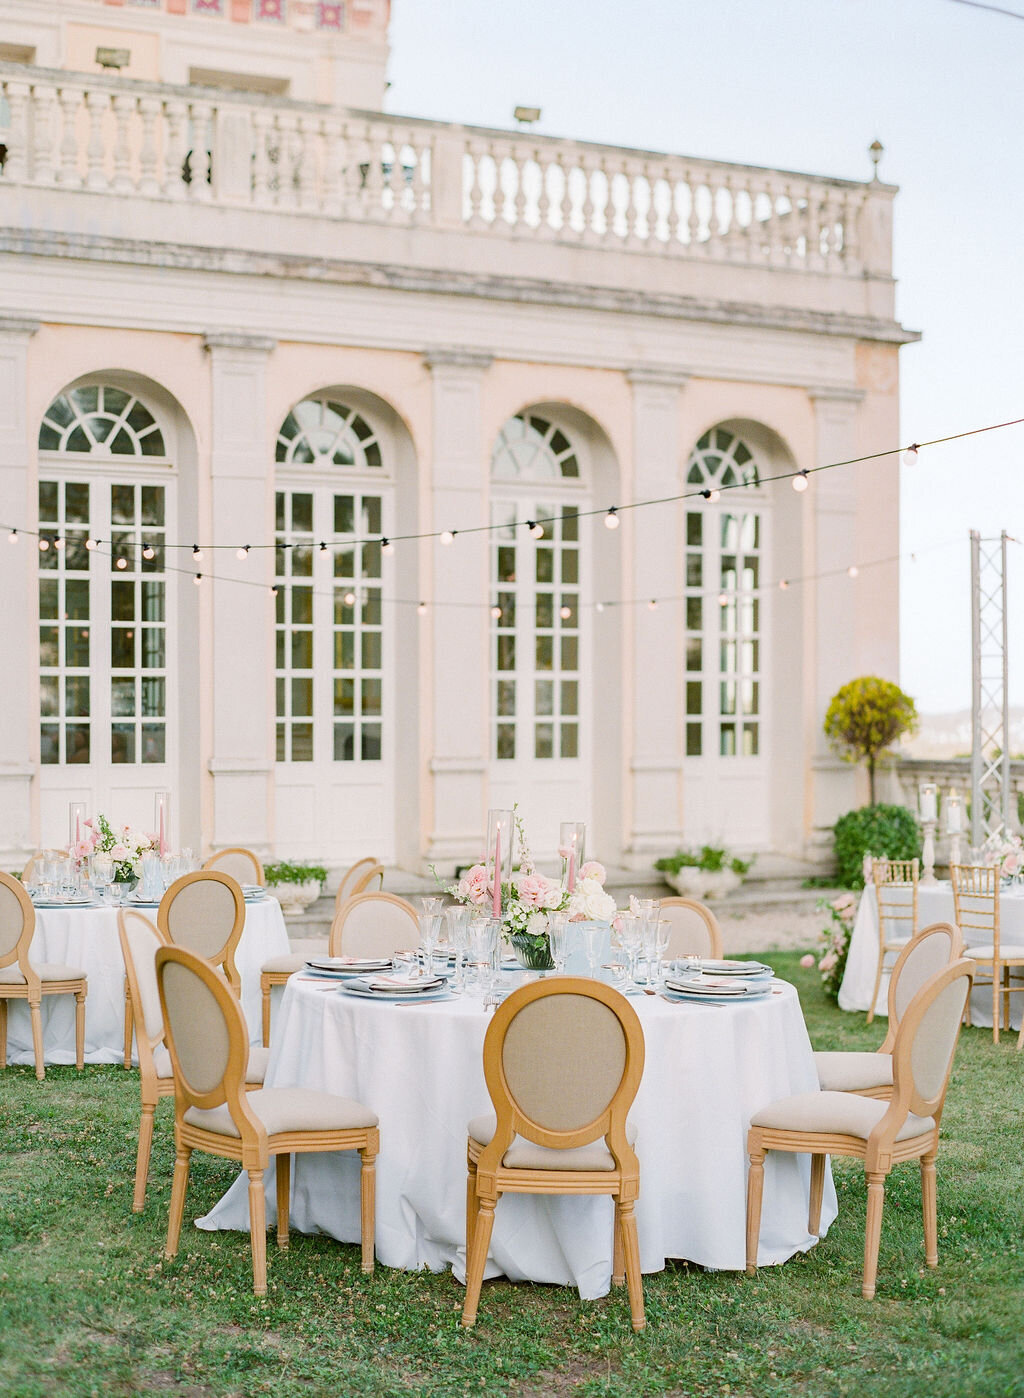 Jennifer Fox Weddings English speaking wedding planning & design agency in France crafting refined and bespoke weddings and celebrations Provence, Paris and destination Alyssa-Aaron-Wedding-Molly-Carr-Photography-Dinner-6